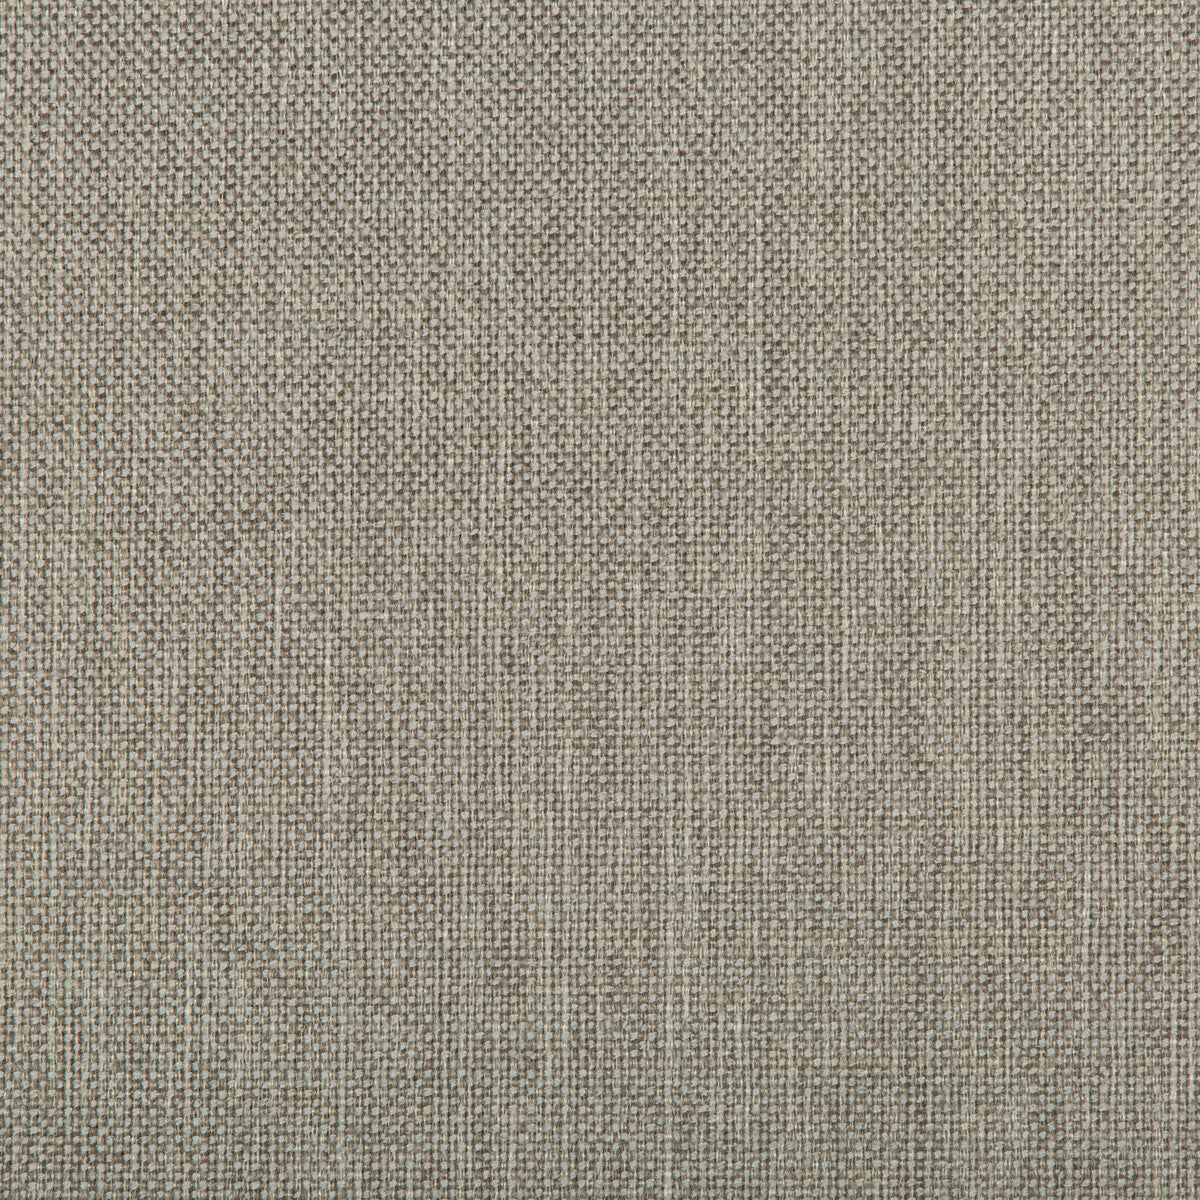 Williams fabric in stone color - pattern 35744.11.0 - by Kravet Contract in the Value Kravetarmor collection